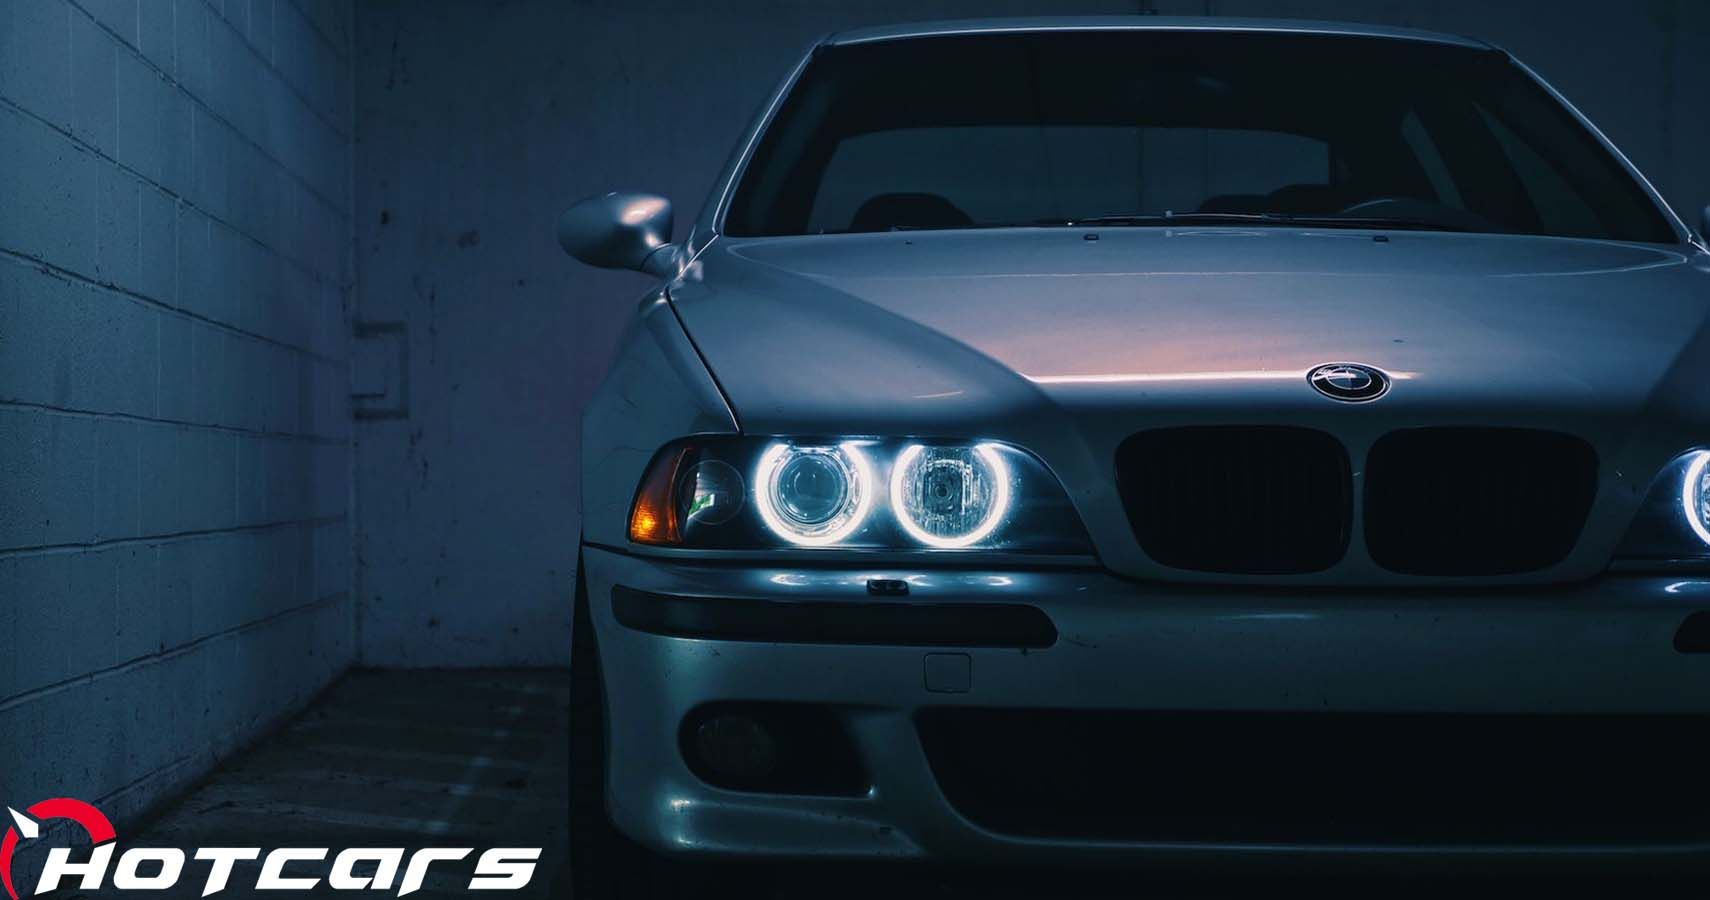 Was the E39 M5 the BEST M5? 2002 BMW M5 Review 